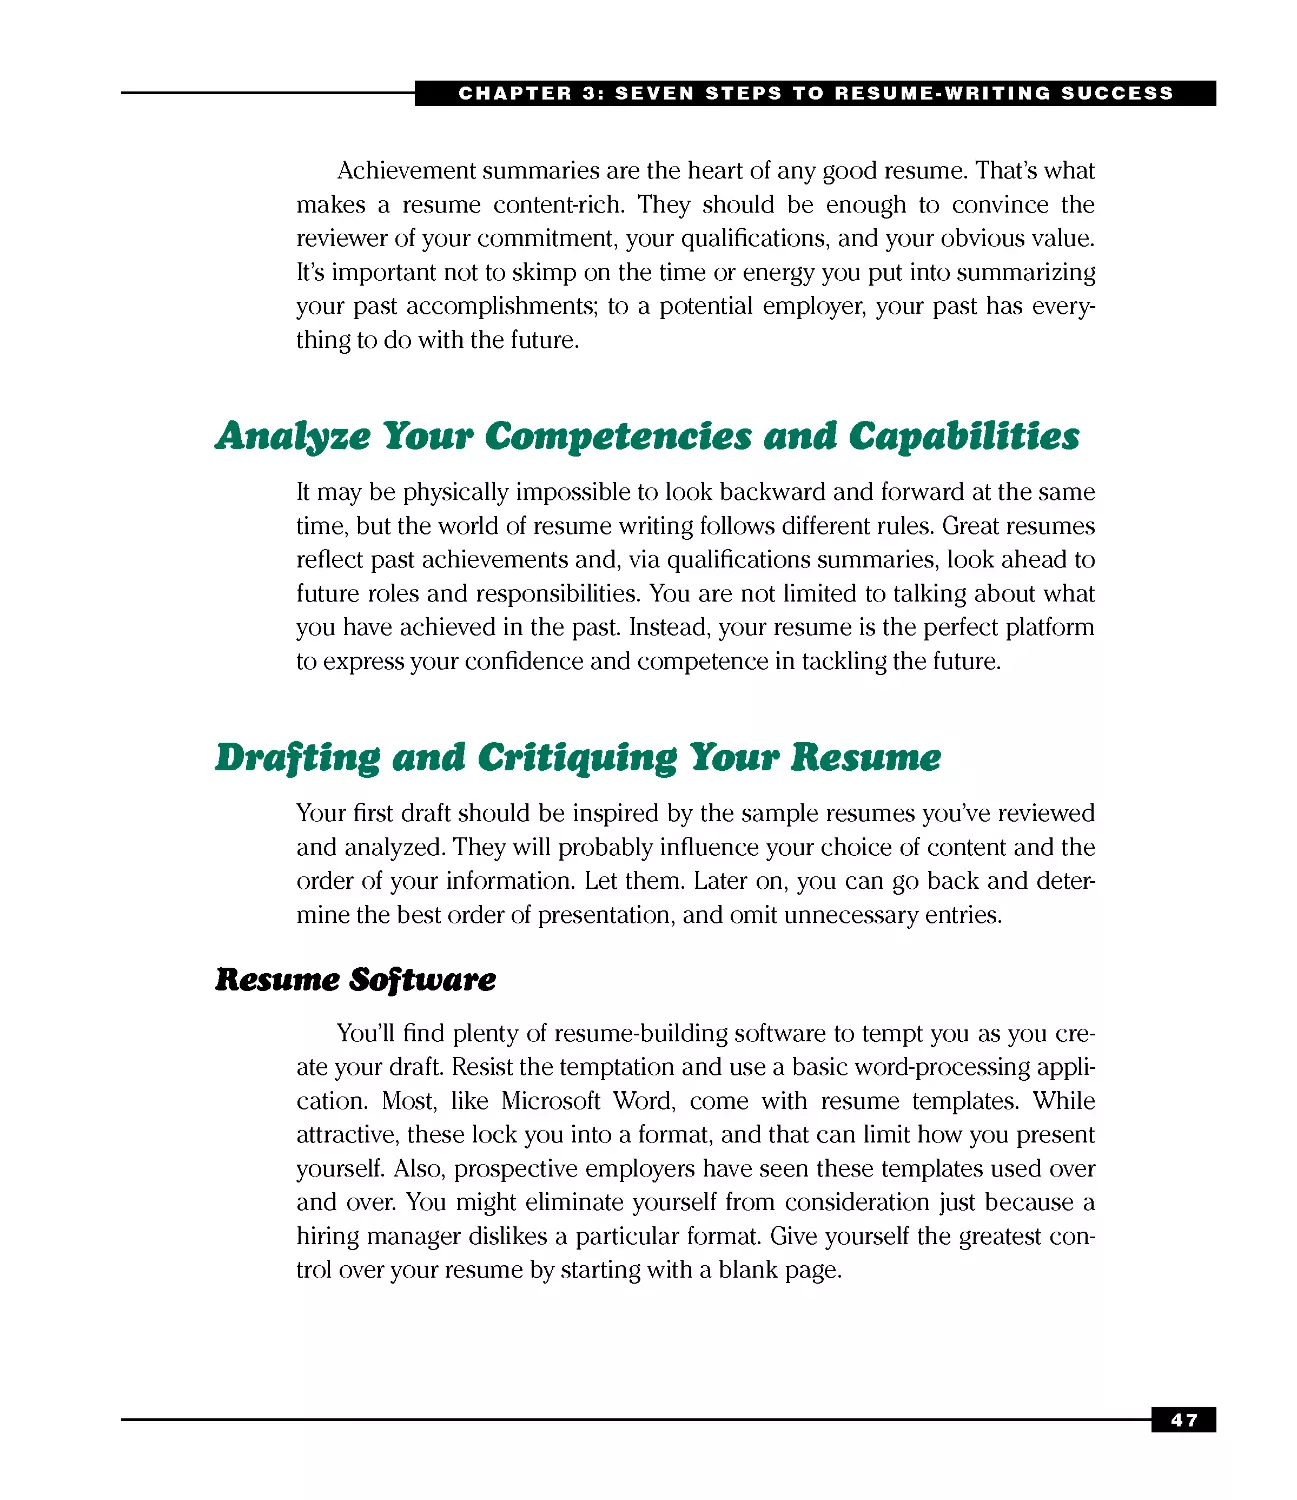 Analyze Your Competencies and Capabilities
Drafting and Critiquing Your Resume